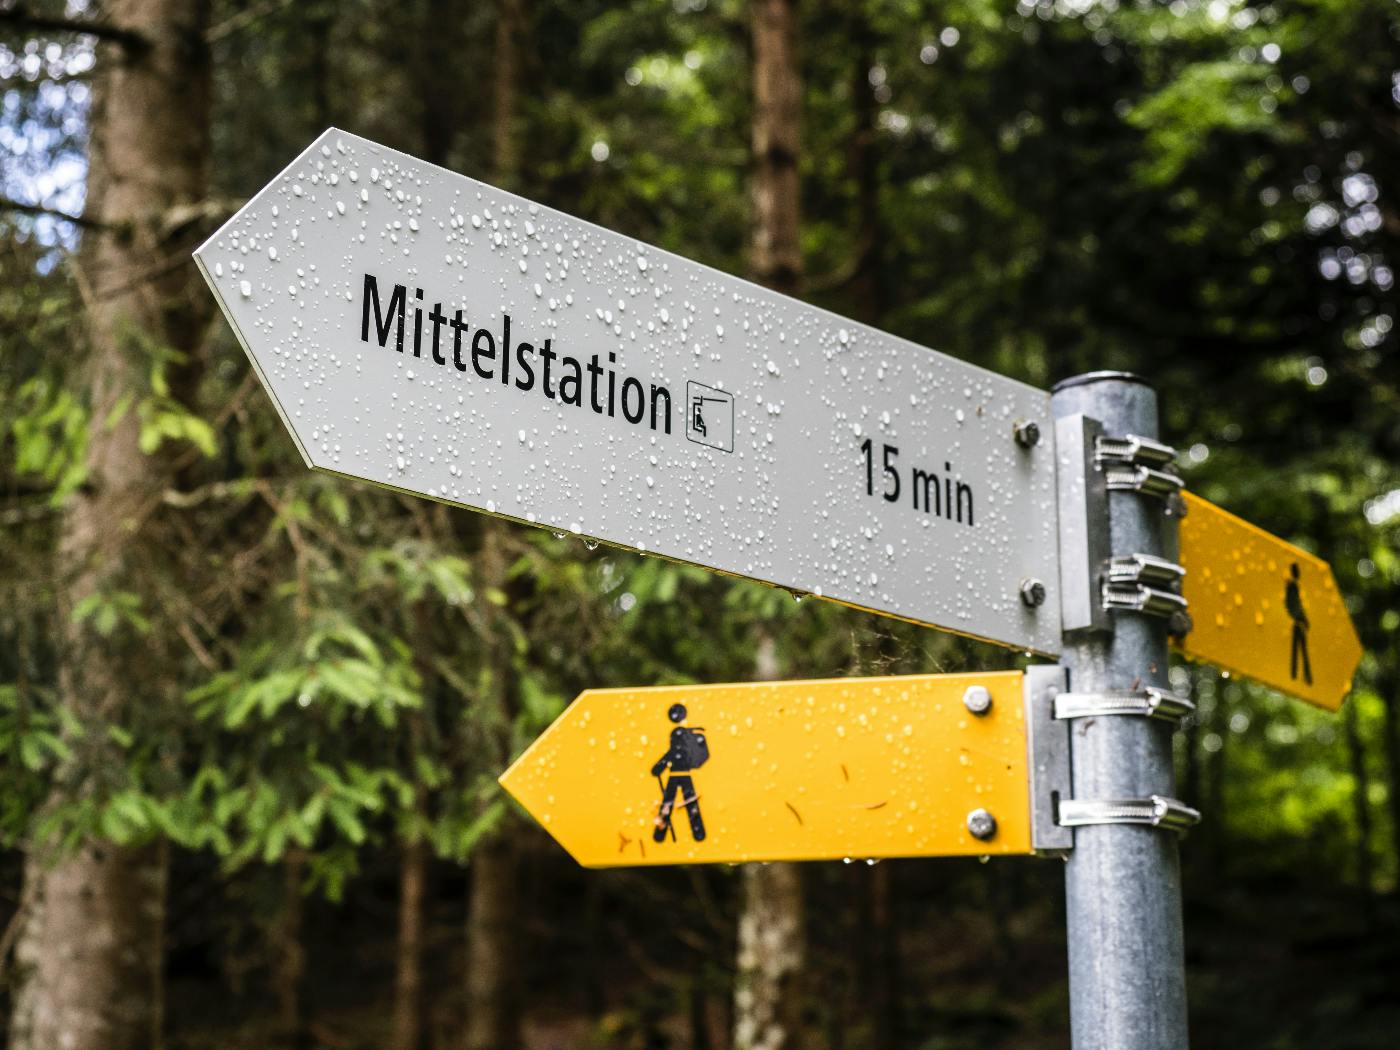 A sign with Mittelstation pointing one way and images of people walking